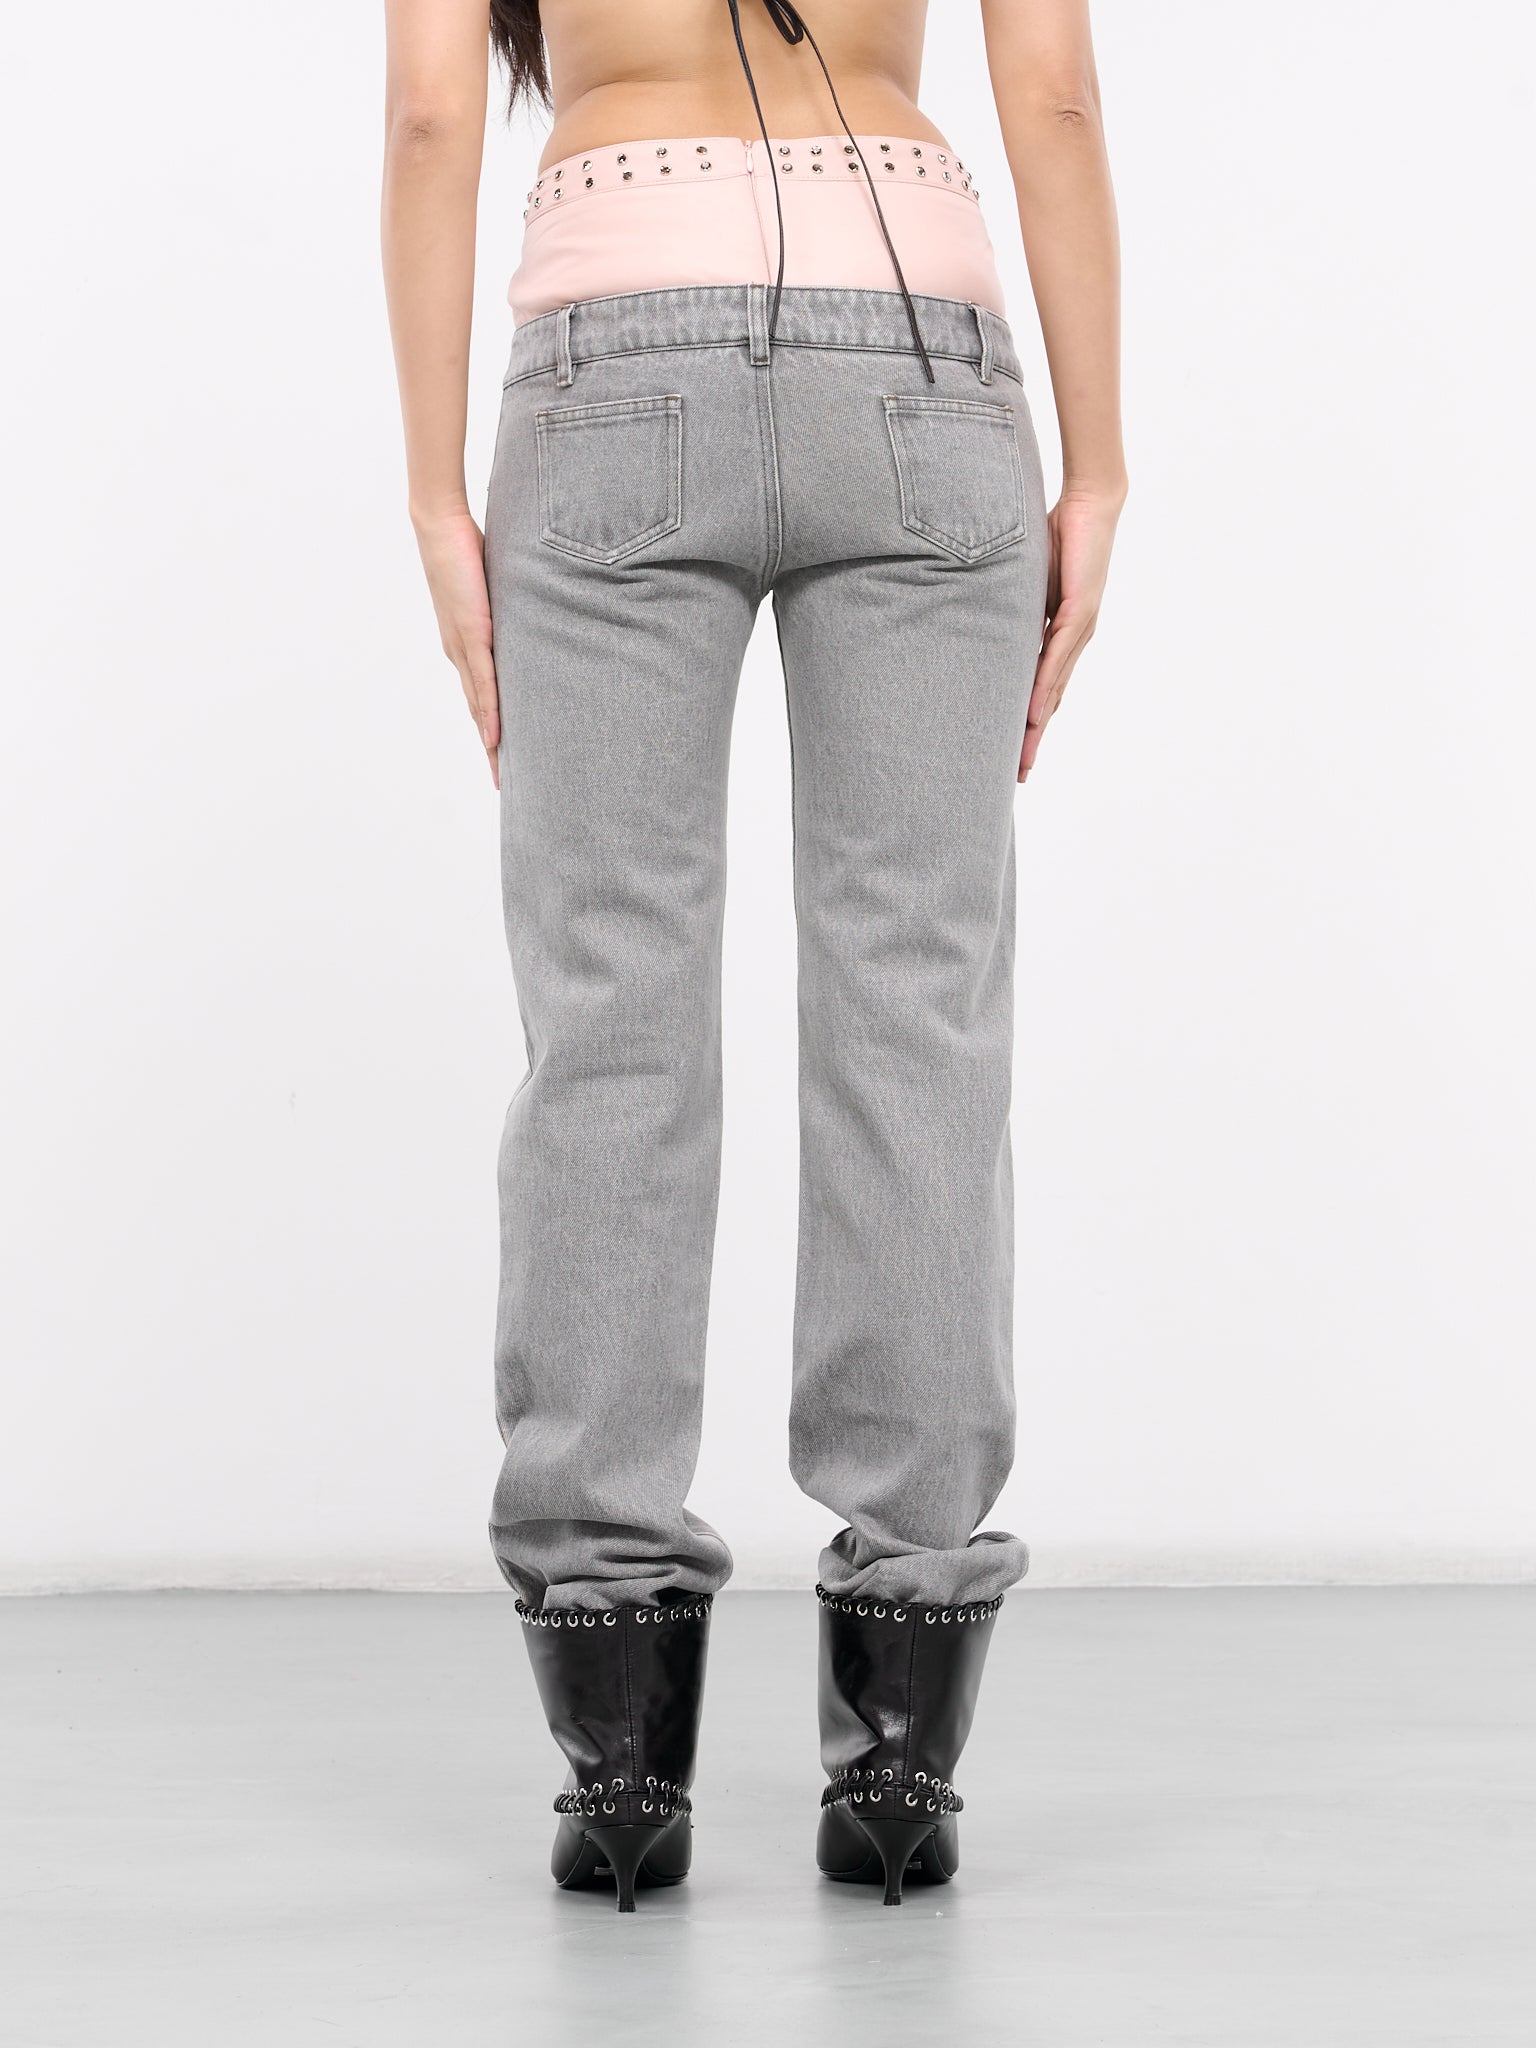 Double Layer Denim Jeans (P002-GREY-PINK)